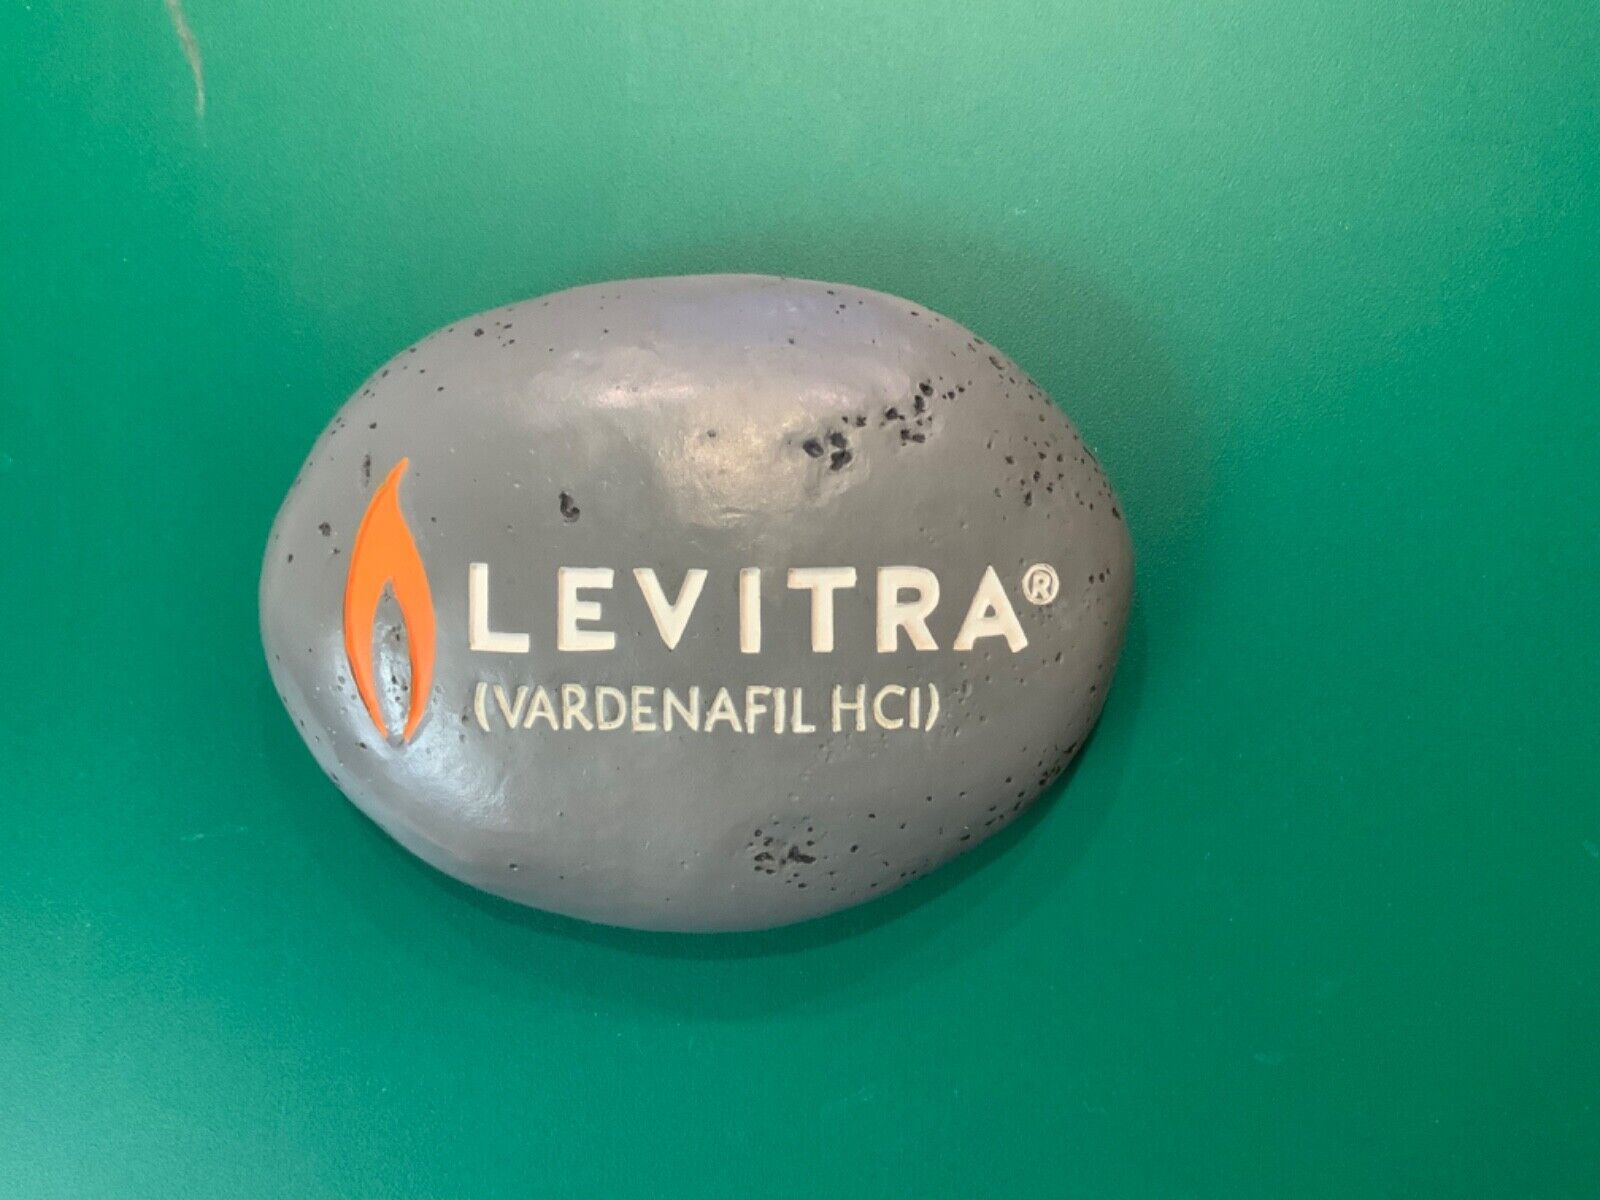 LEVITRA PAPERWEIGHT - PHARMACEUTICAL DRUG REP COLLECTIBLE - Very Rare find